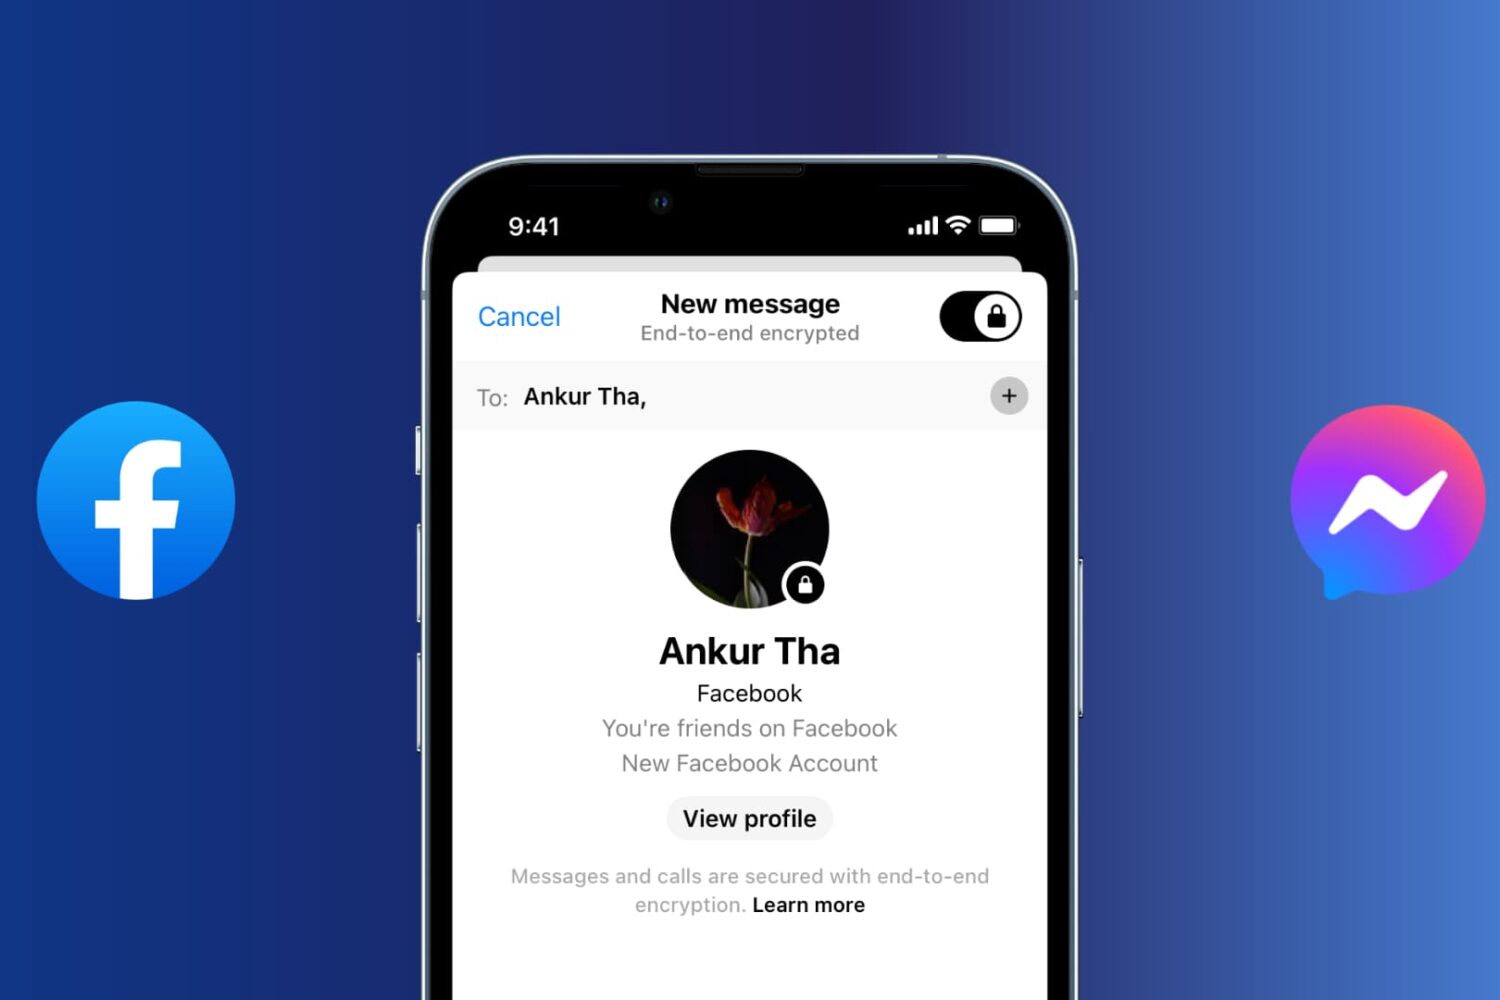 iPhone screen showing Facebook Messenger app with an encrypted secret conversation